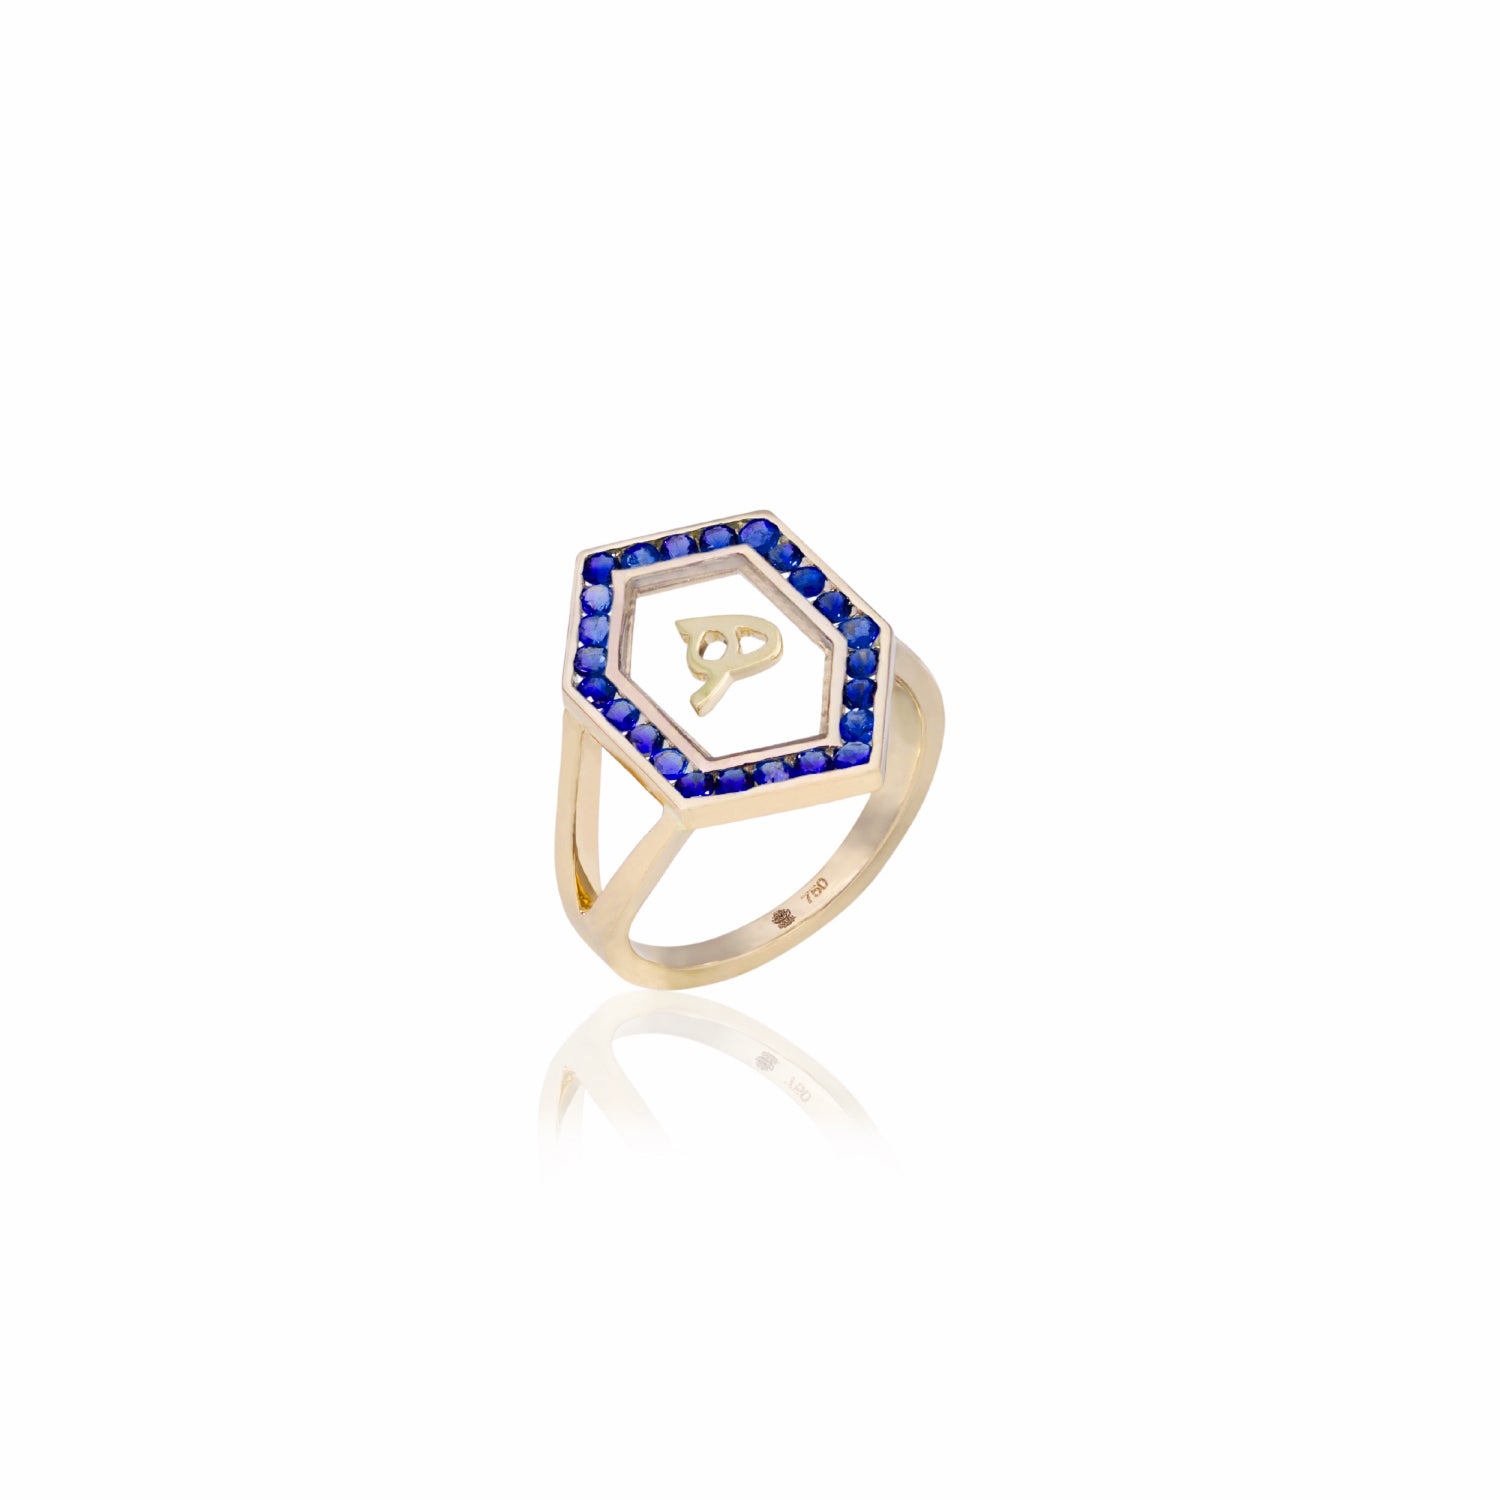 Qamoos 1.0 Letter هـ Sapphire Ring in Yellow Gold